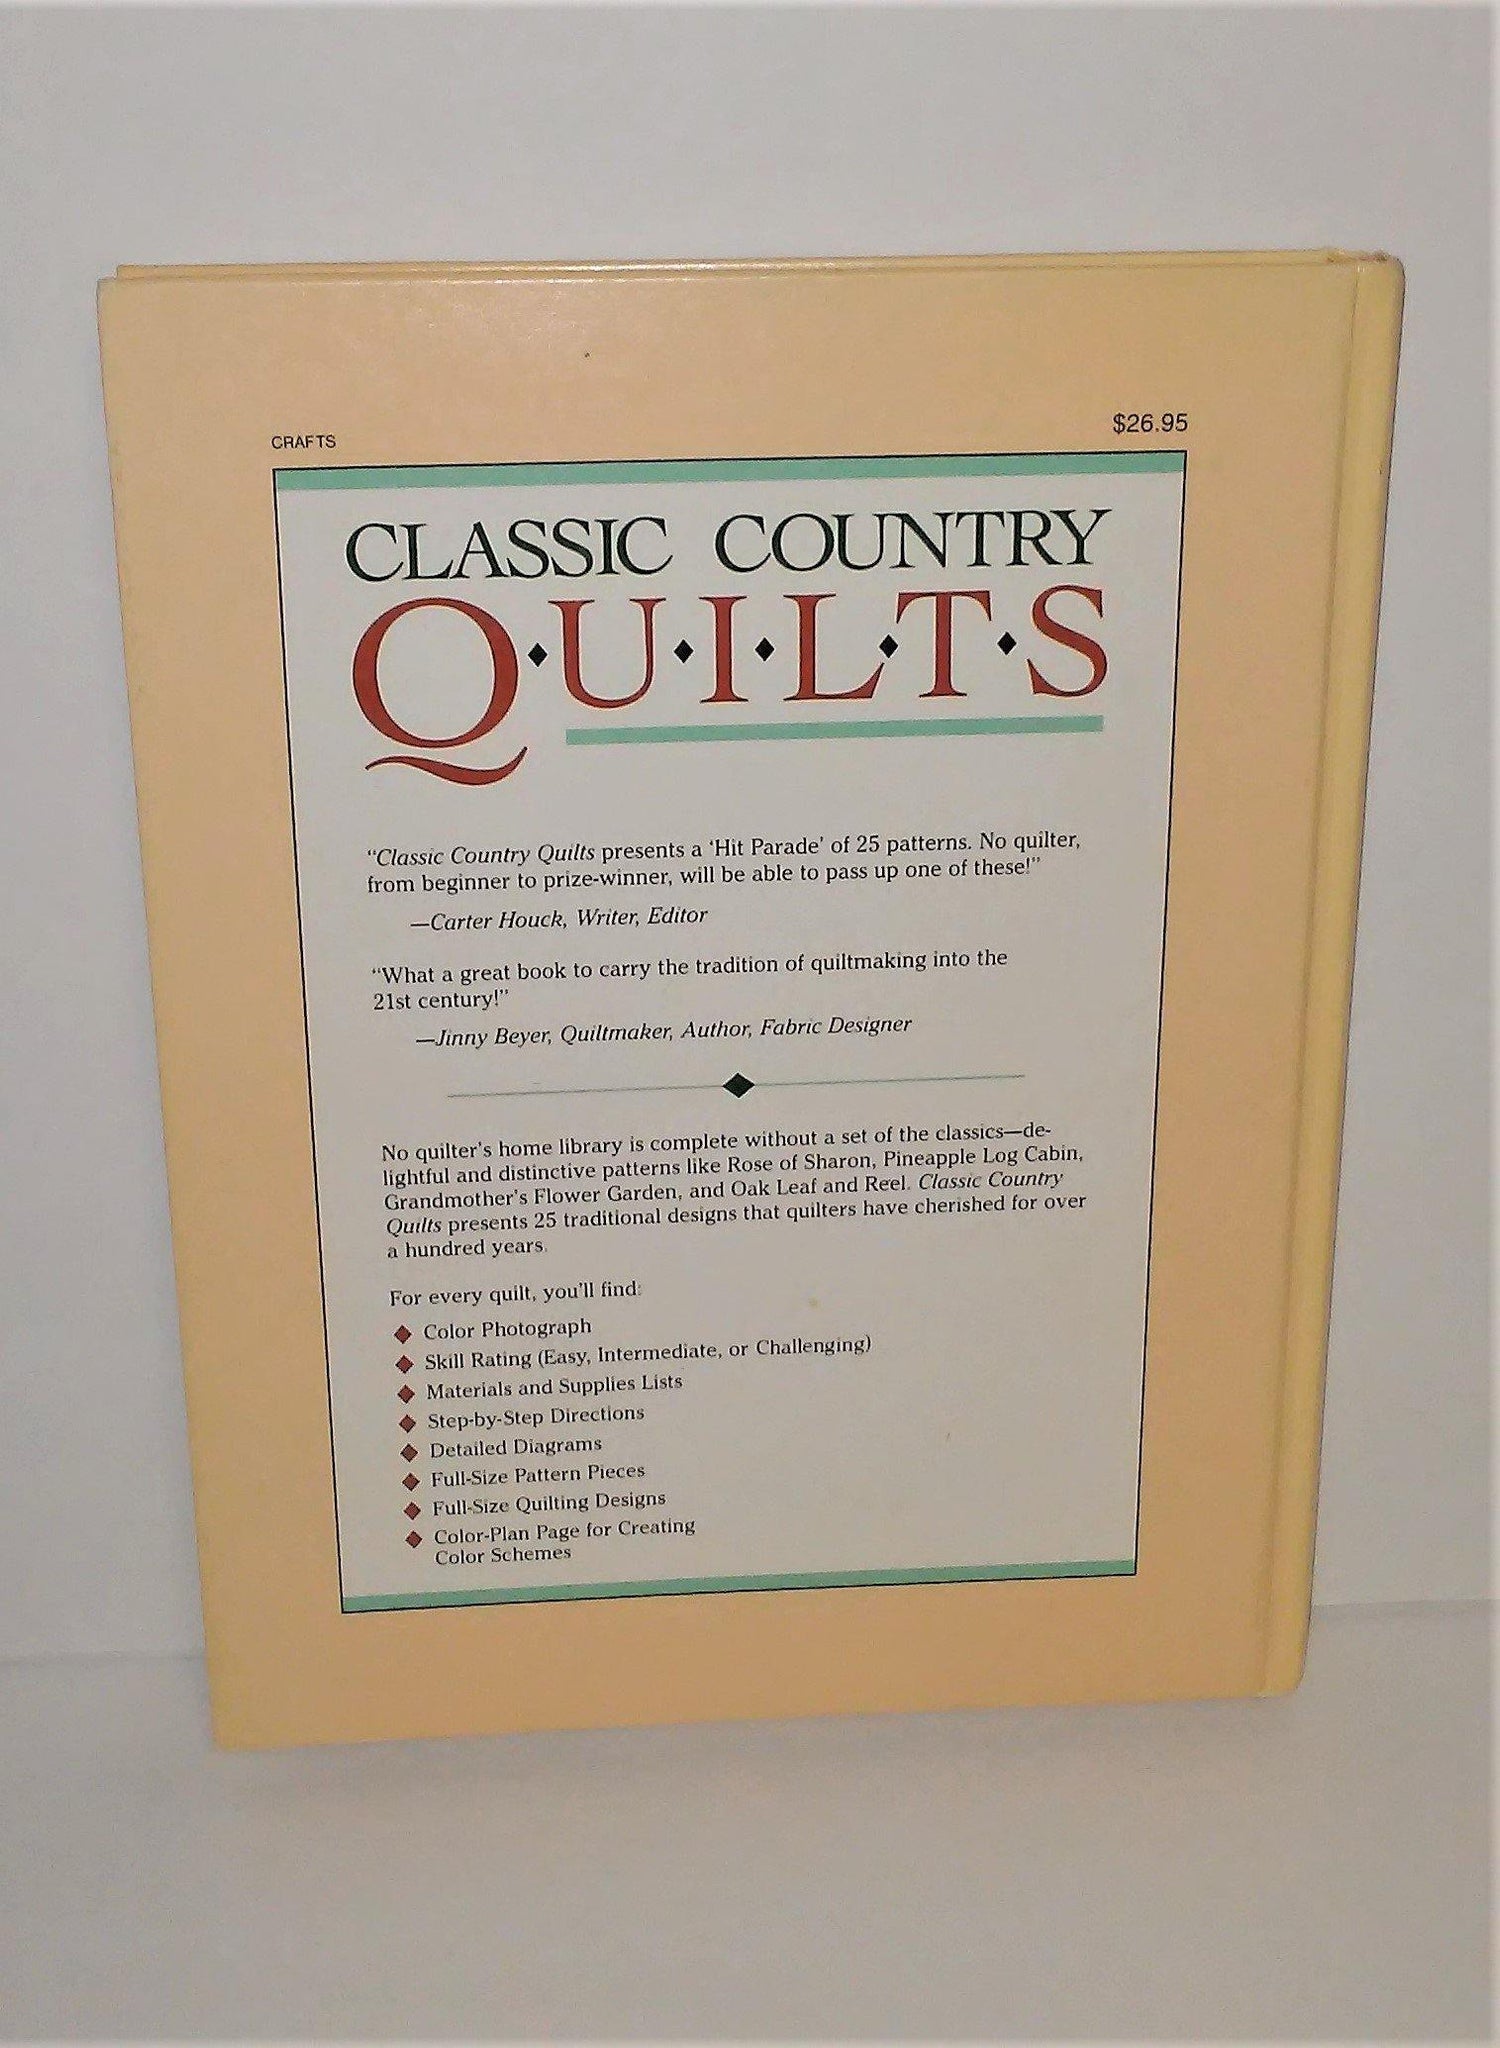 Classic Country Quilts by Rodale Quilt Books includes 25 all-time favorite  quilt patterns. Printed in 1993.